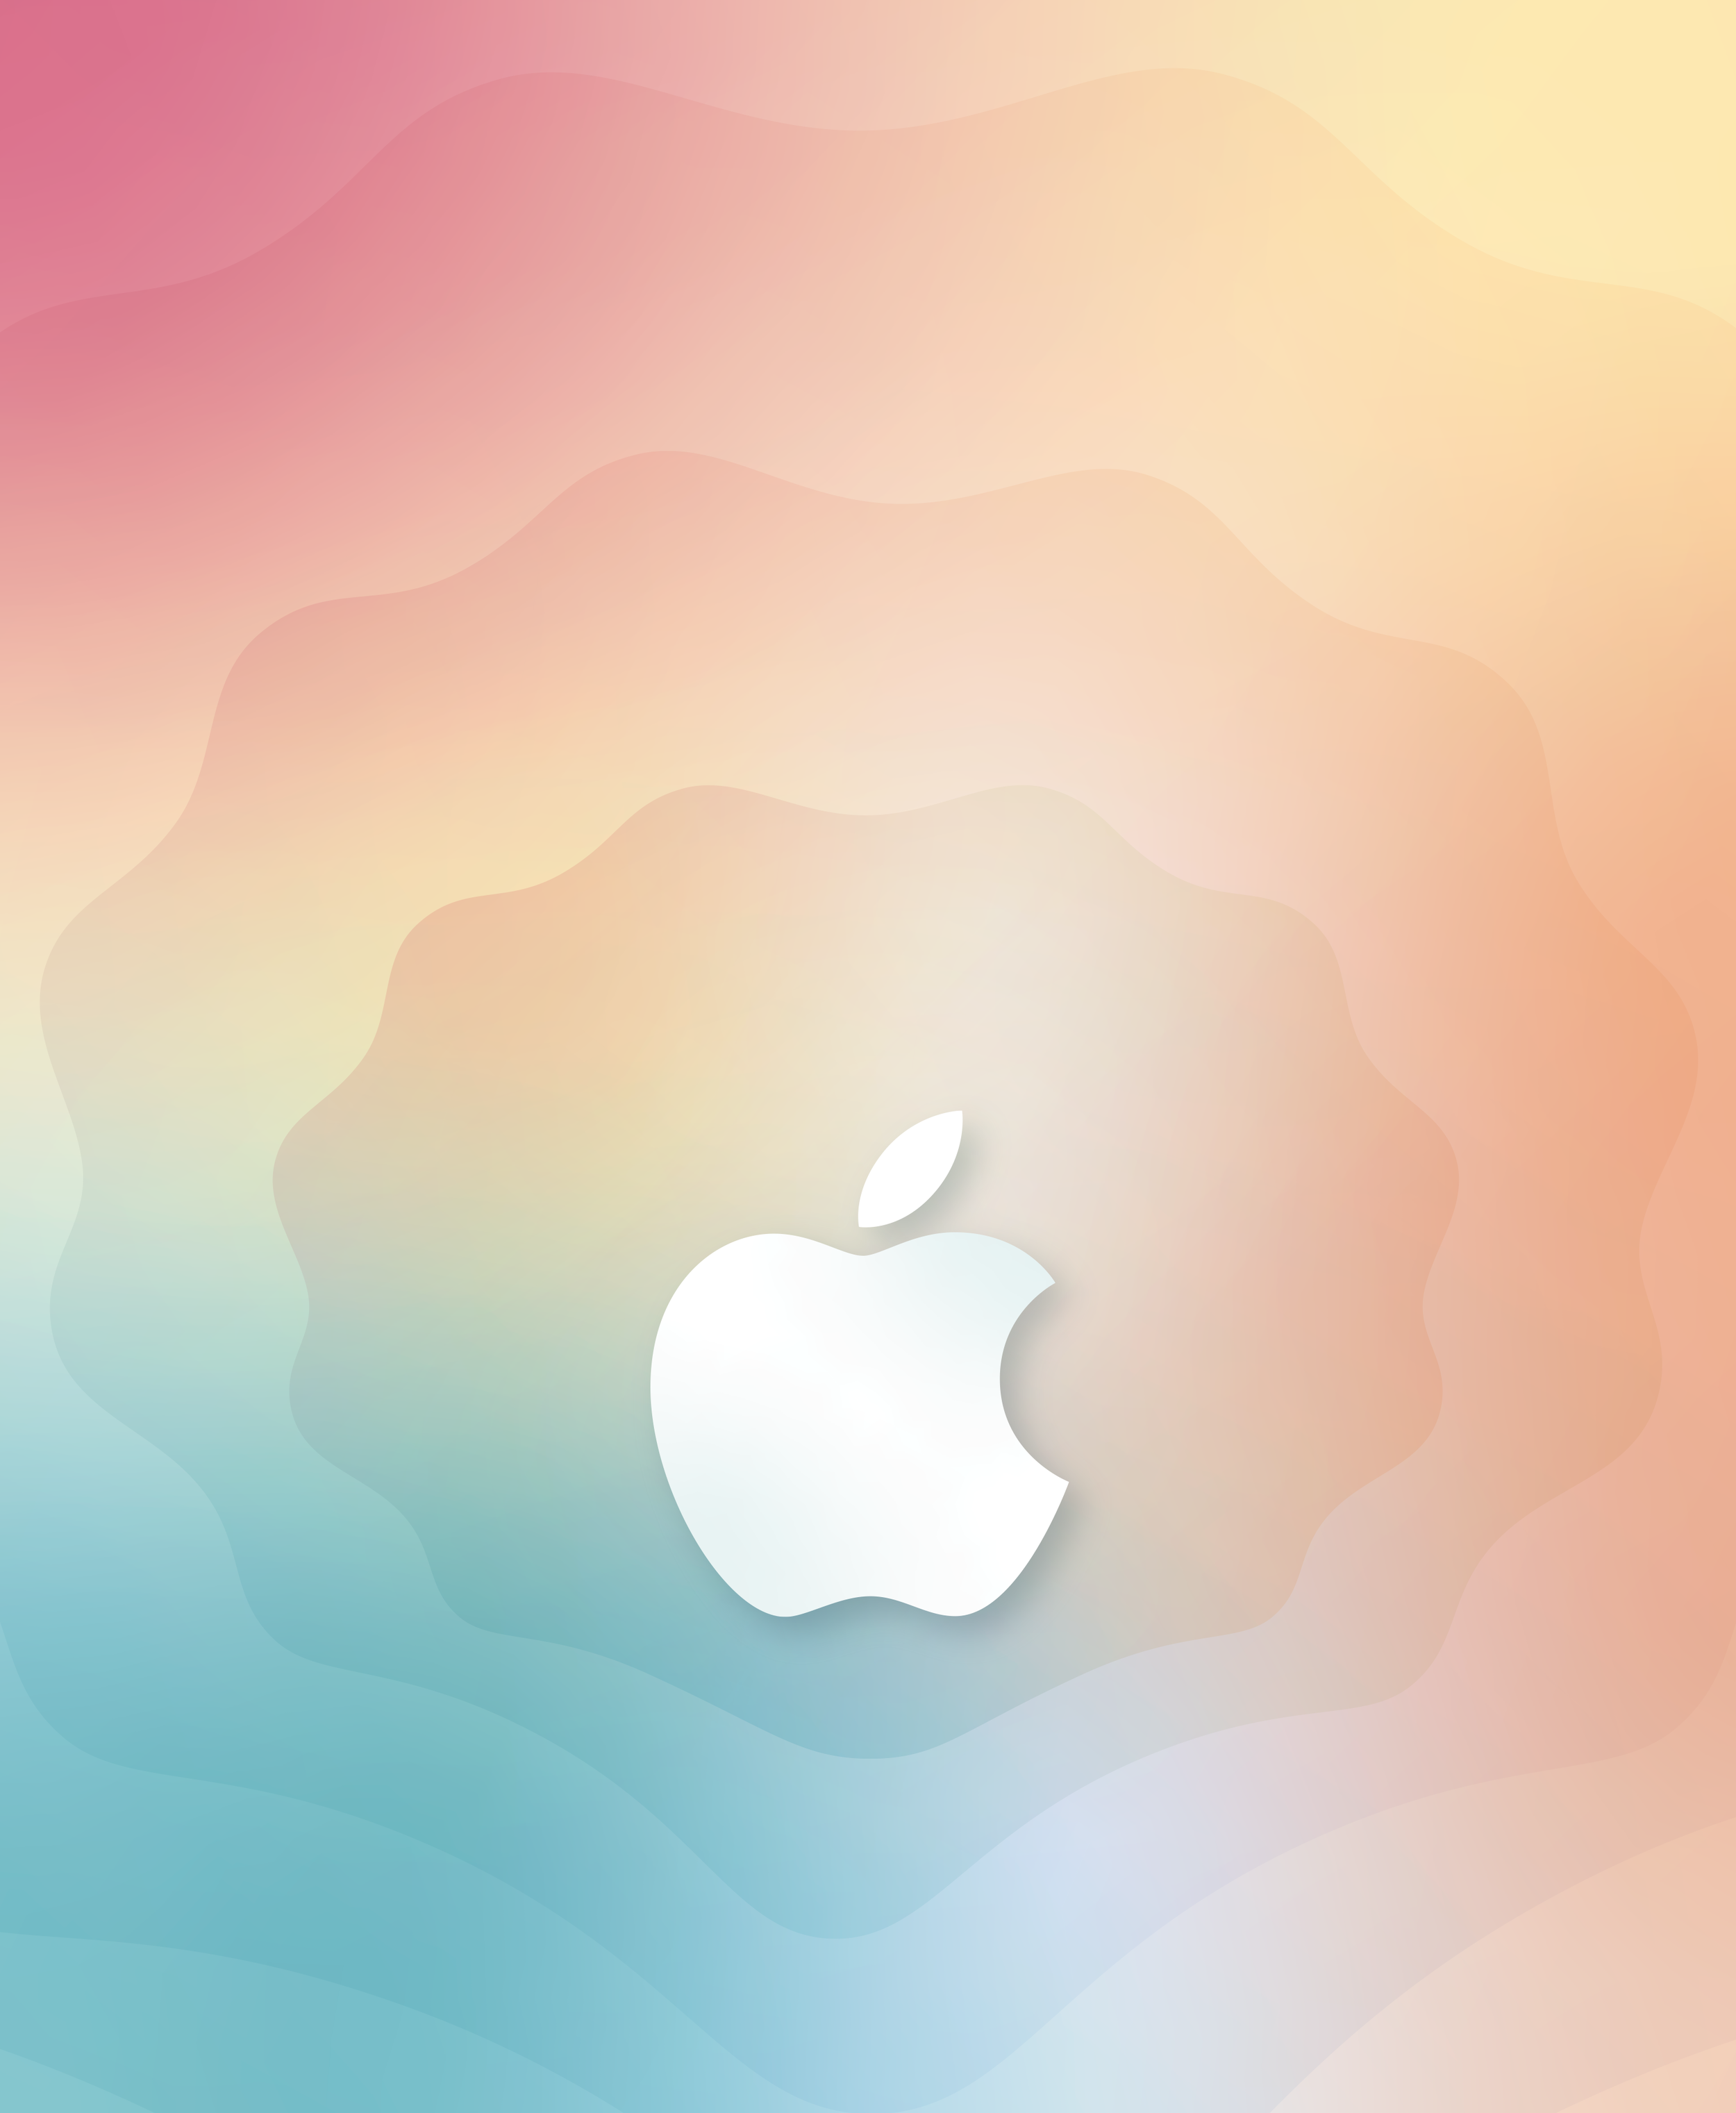 New Apple Store opens soon in Al Maryah, Abu Dhabi. Download the relevant Apple Wallpaper here